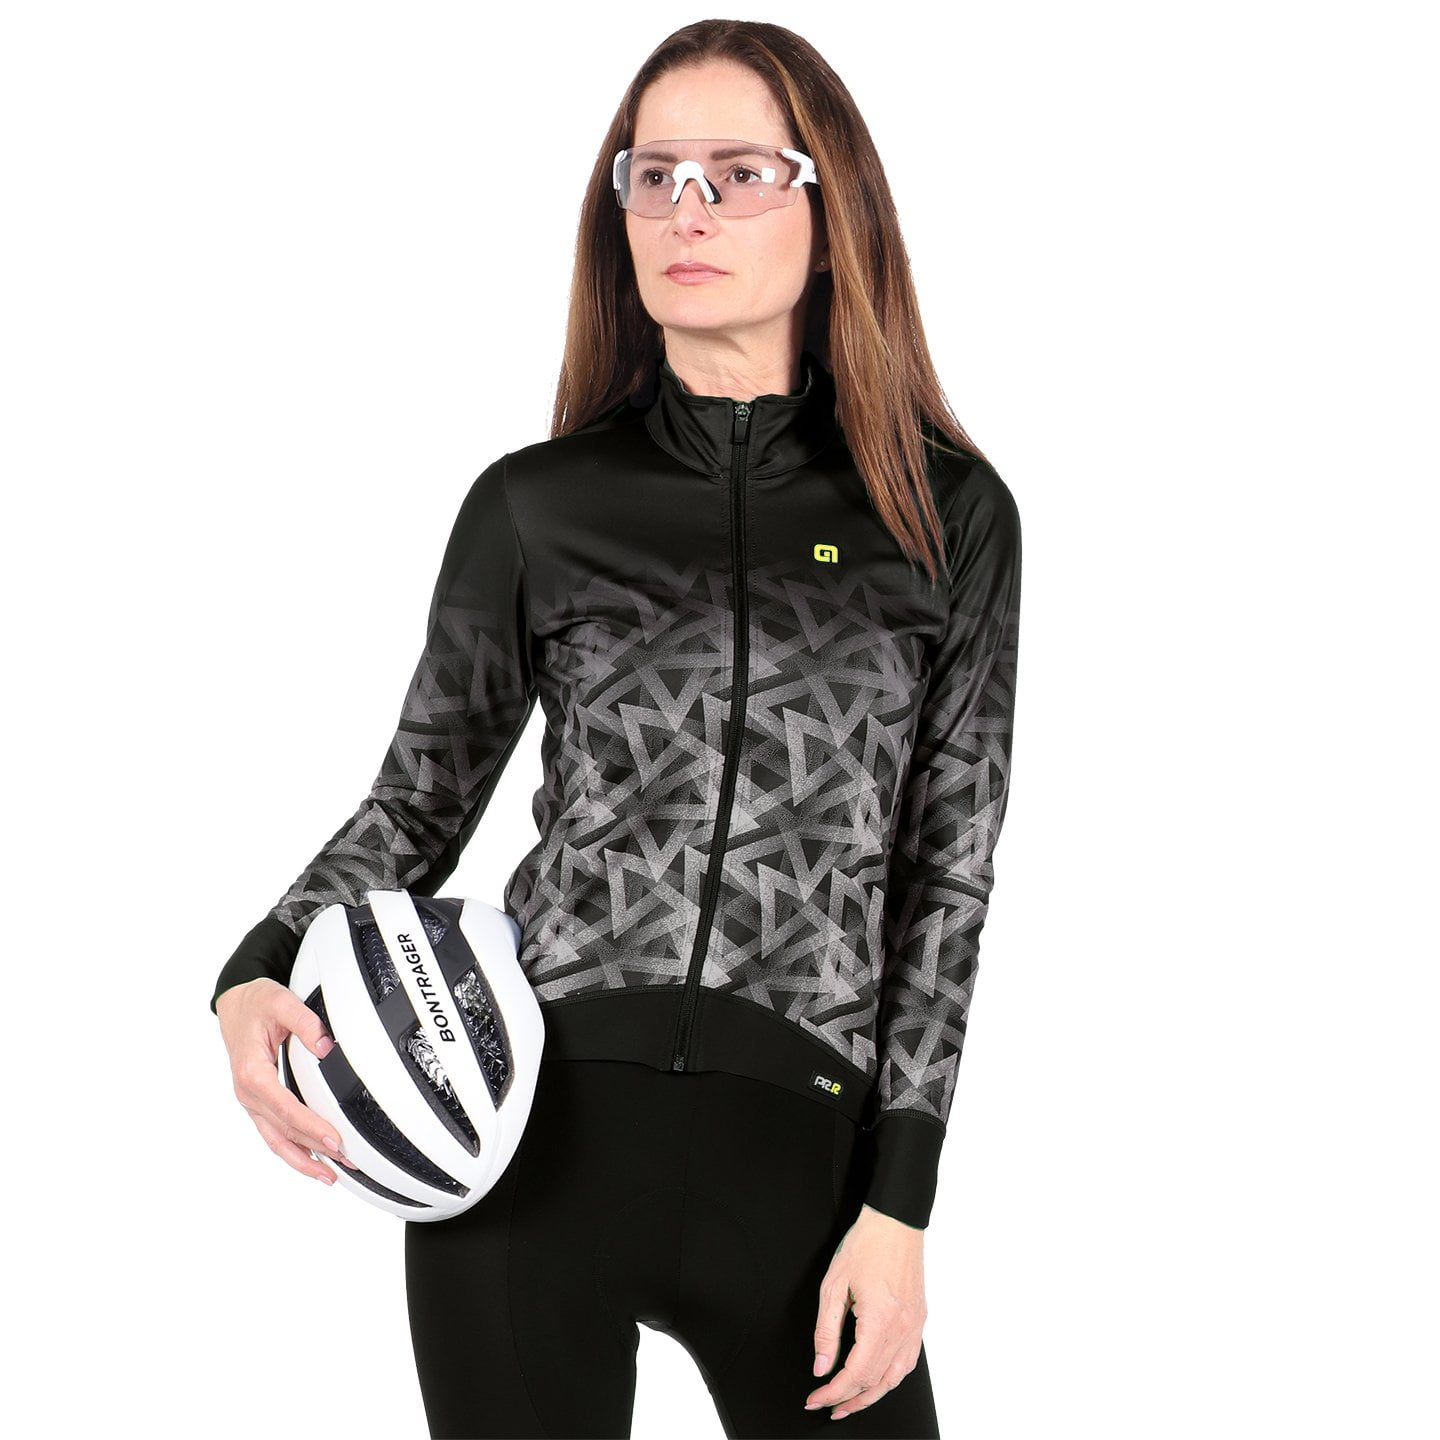 ALE Pyramid Women’s Winter Jacket Women’s Thermal Jacket, size M, Cycle jacket, Cycling clothing